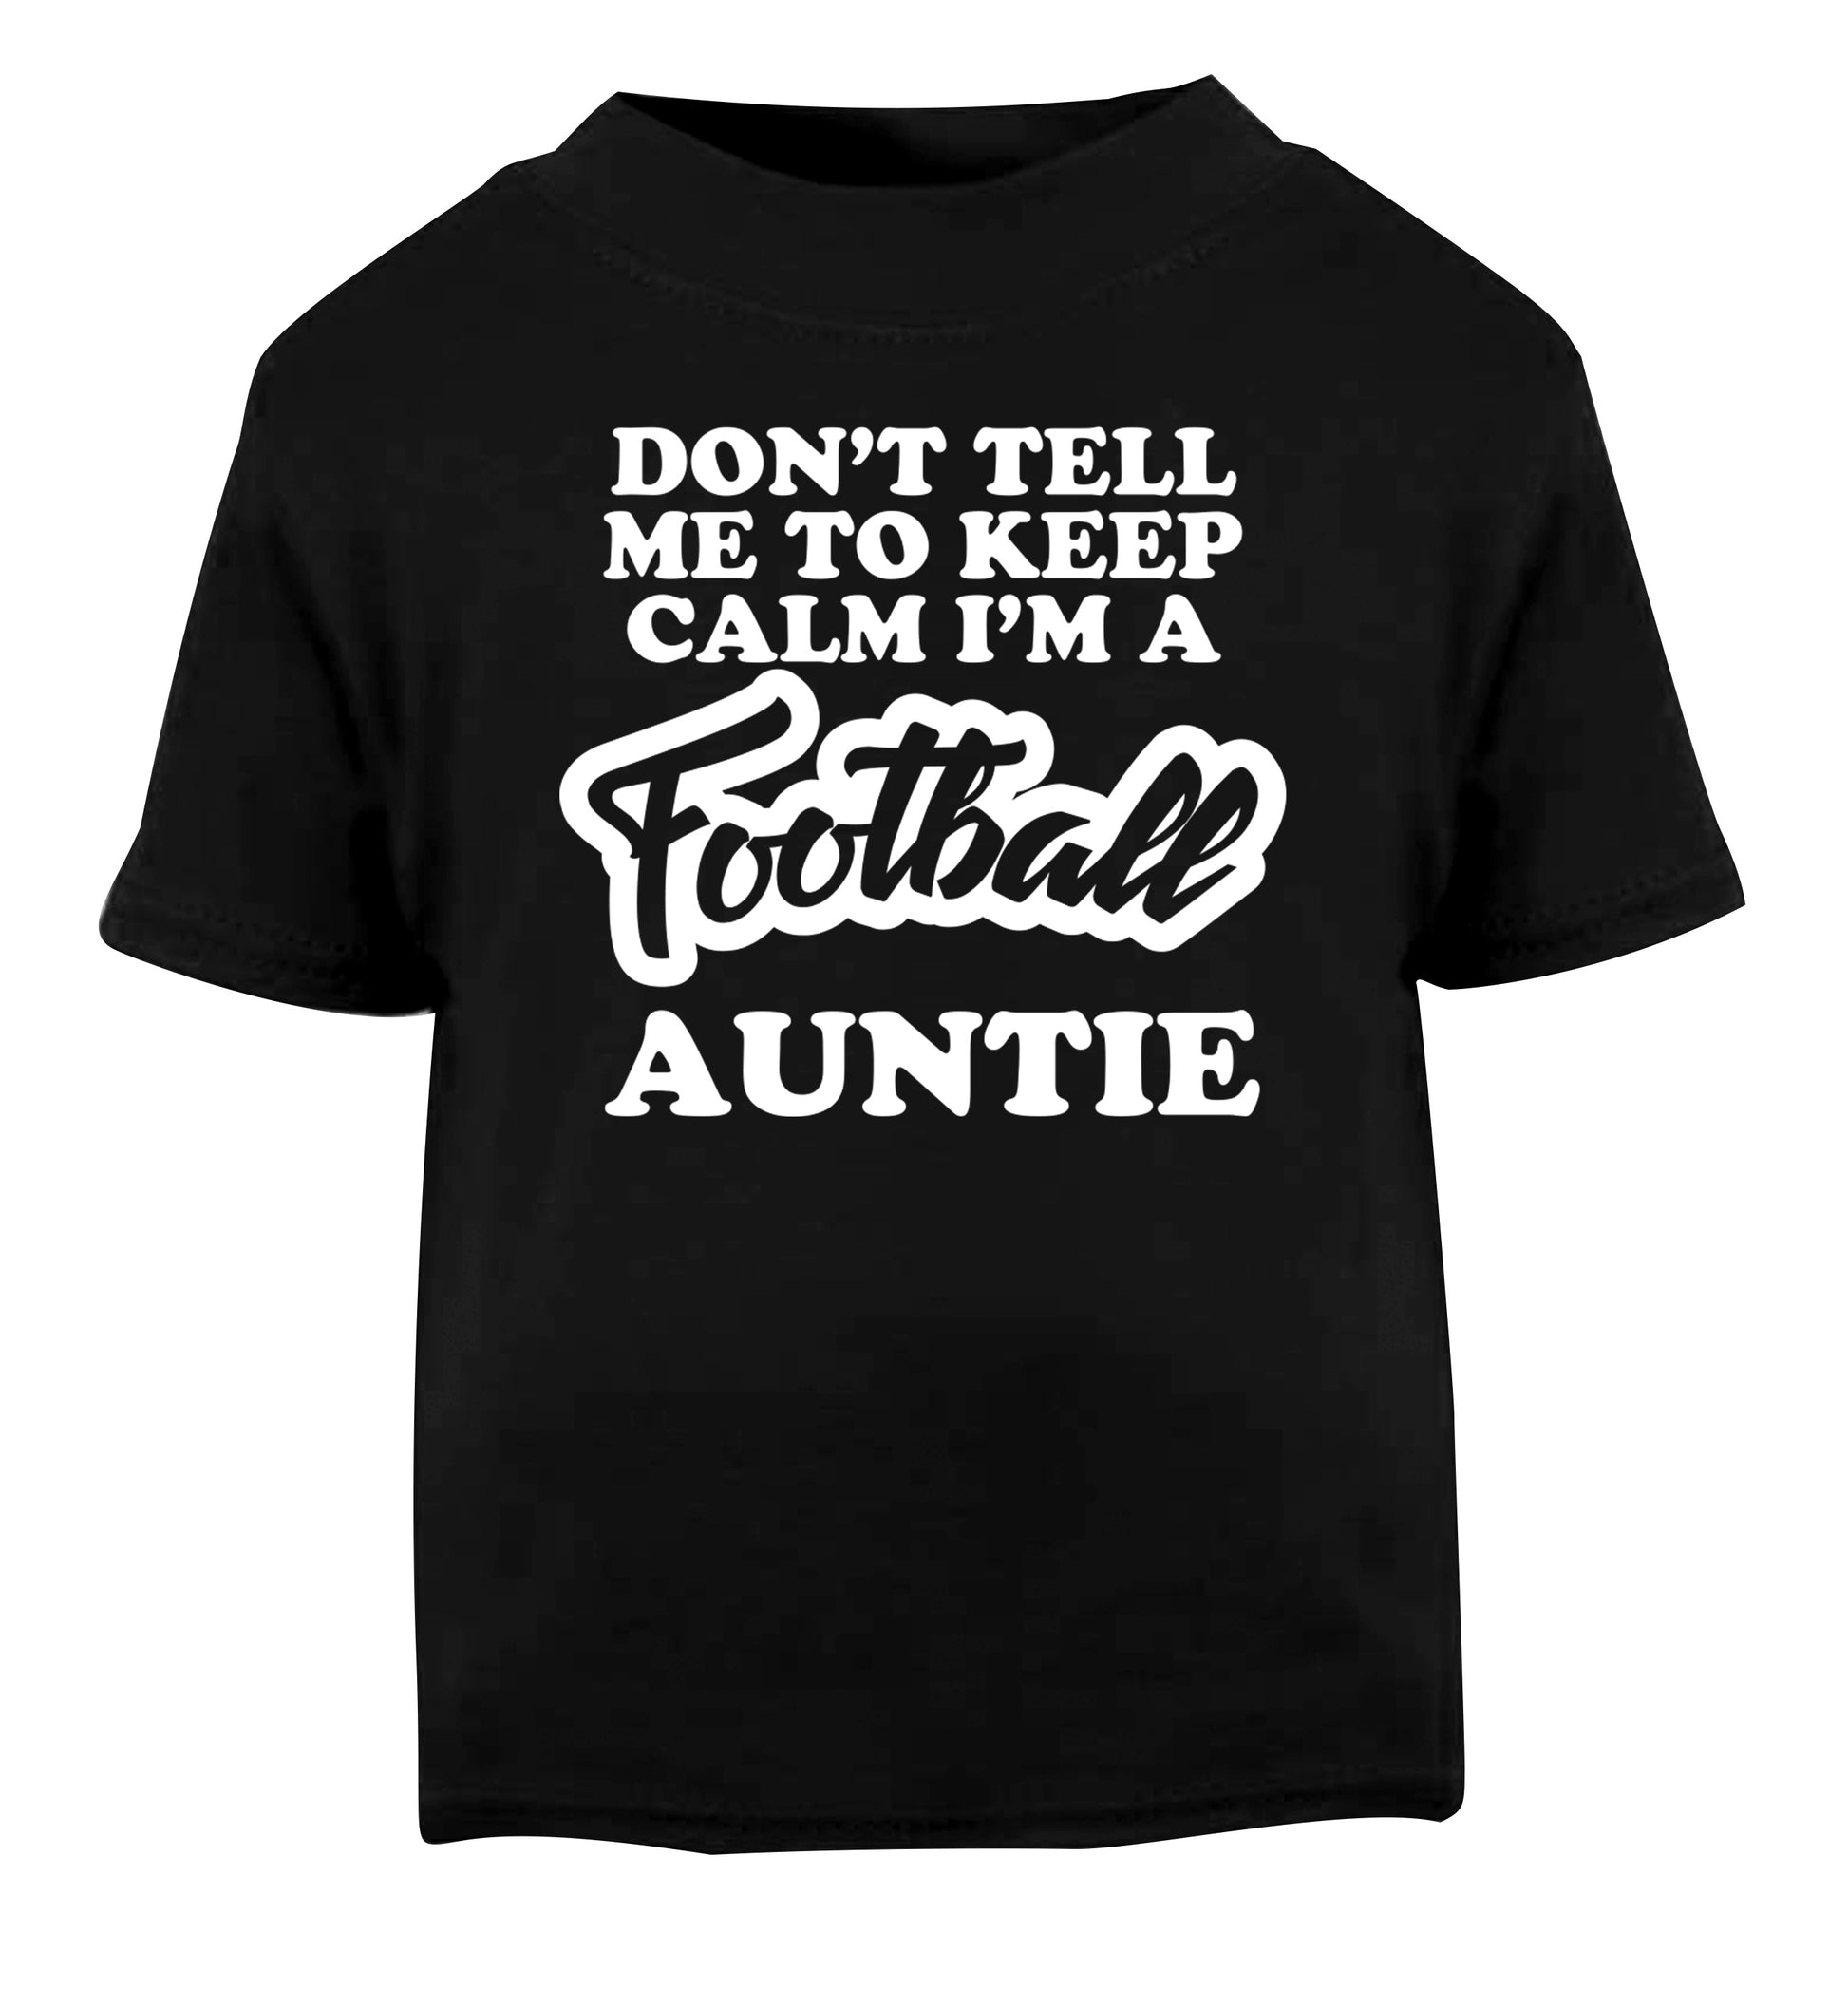 Don't tell me to keep calm I'm a football auntie Black Baby Toddler Tshirt 2 years